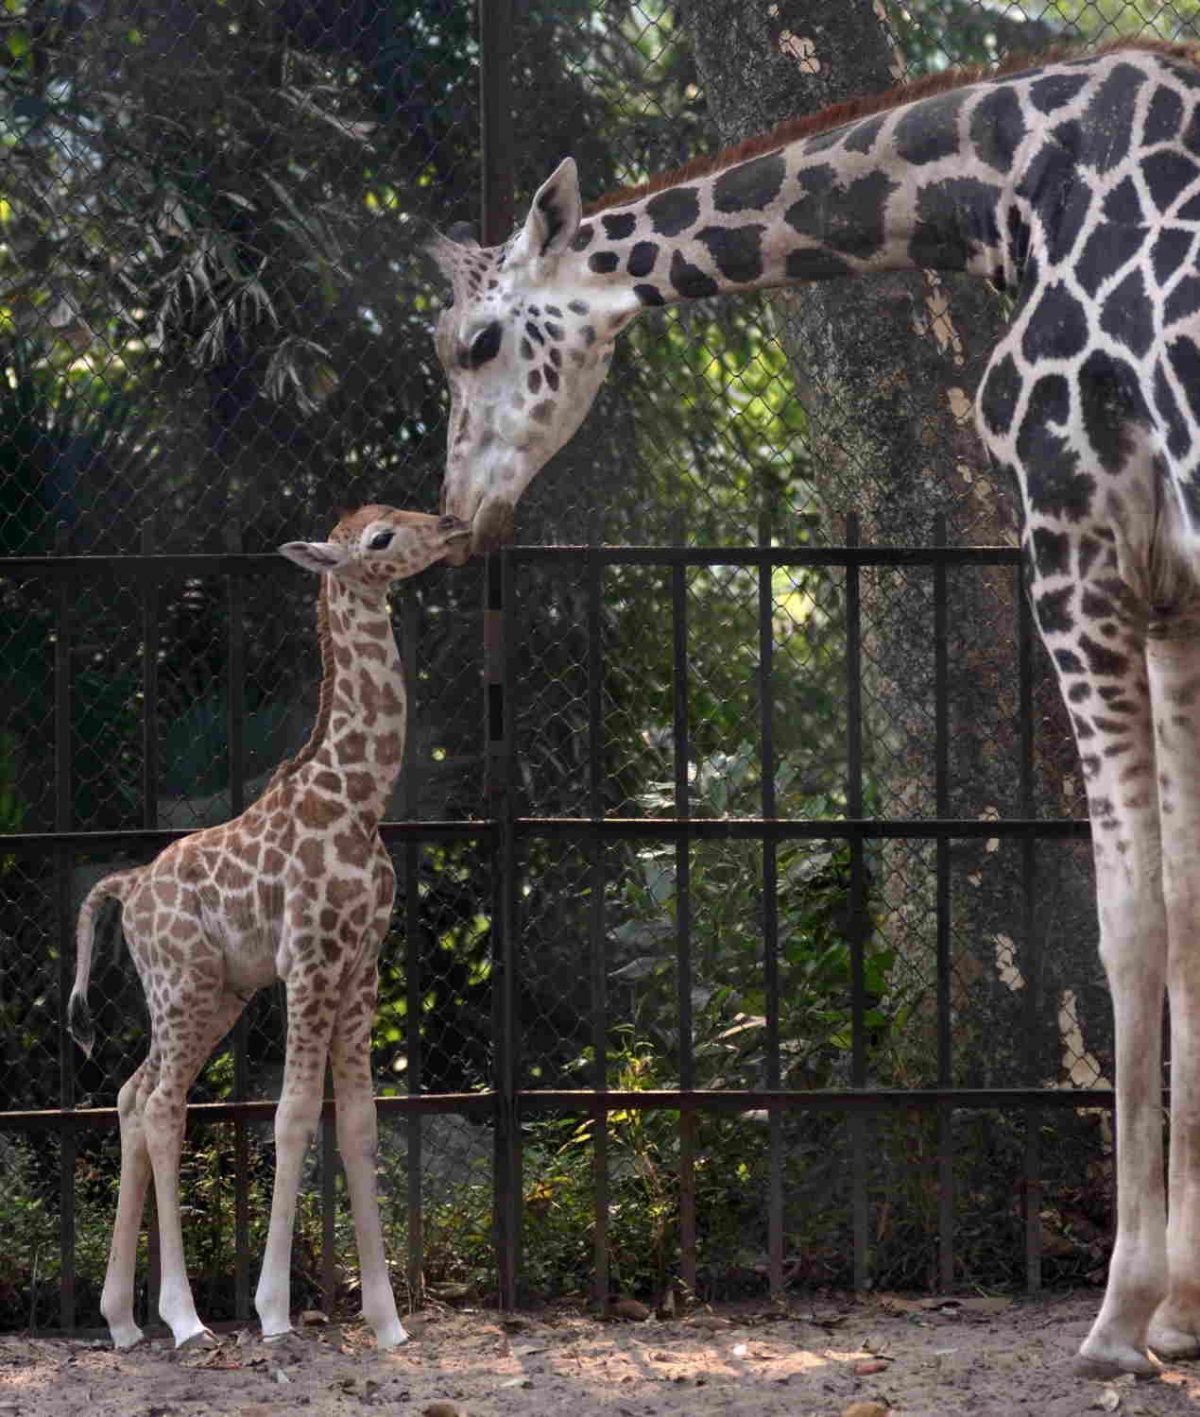 World’s largest zoo to come up in Gujarat